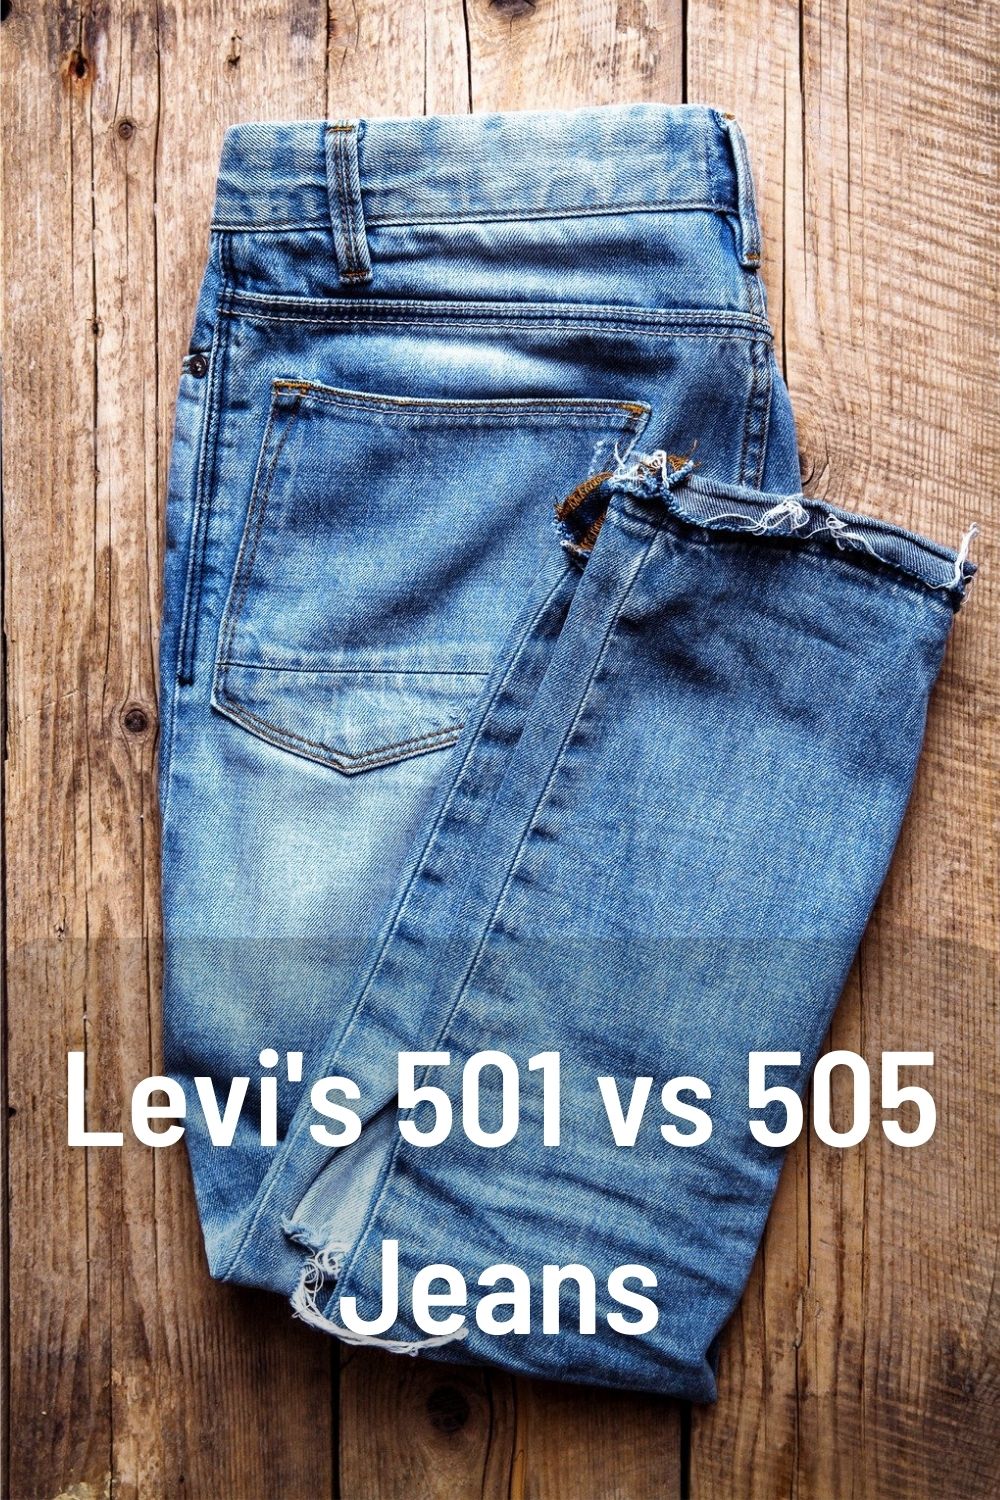 Levi's 501 vs 505 Jeans: Differences Between Them